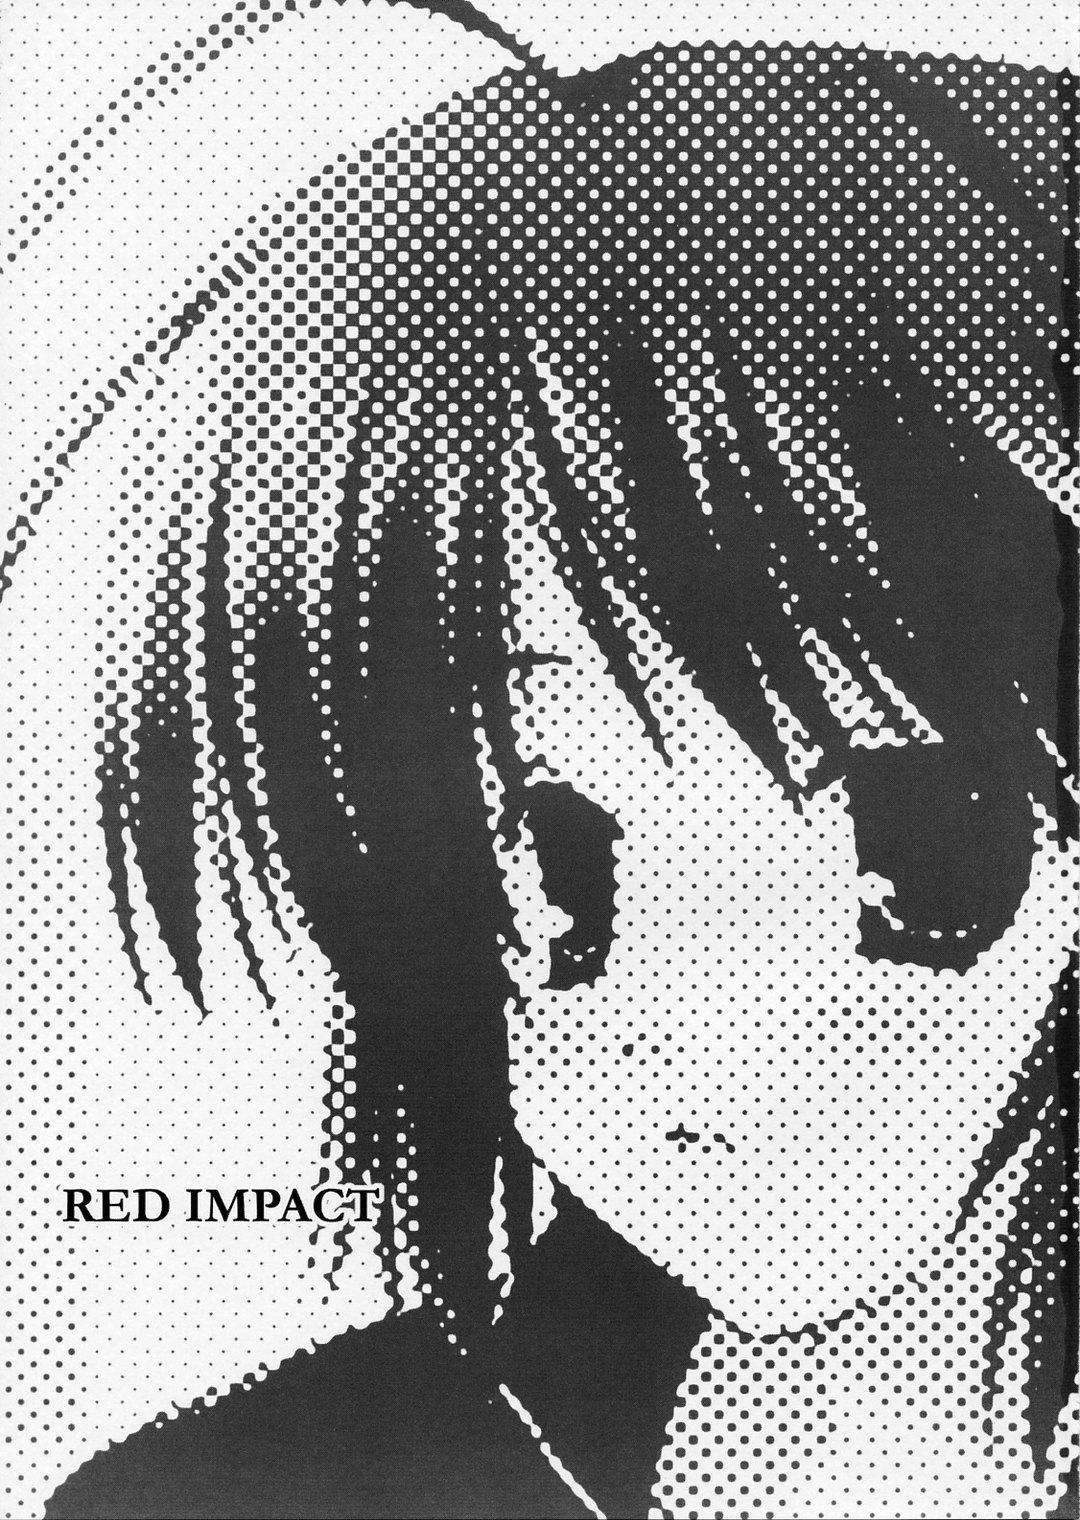 Oral Sex Red Impact - Gundam seed destiny Gad guard Free Oral Sex - Page 2